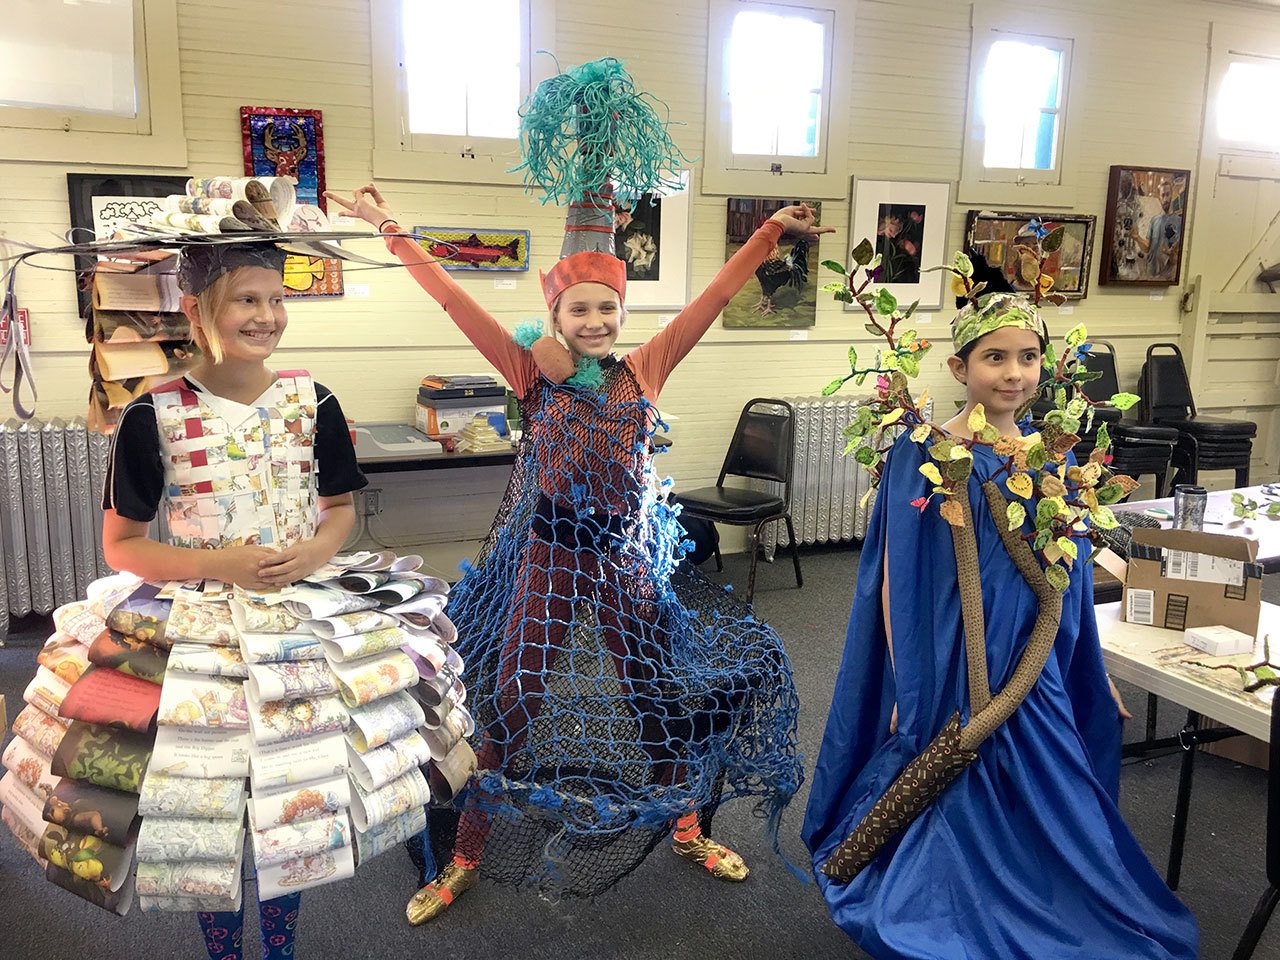 2553: Middle school students Nadia Fisch, Ruby Mills and Biaani Egeler have worked on their creations in a class at the Port Townsend School of Art. They will be presenting them at the student Wearable Art Show on Saturday. (Margie McDonald/Wearable Art Show)